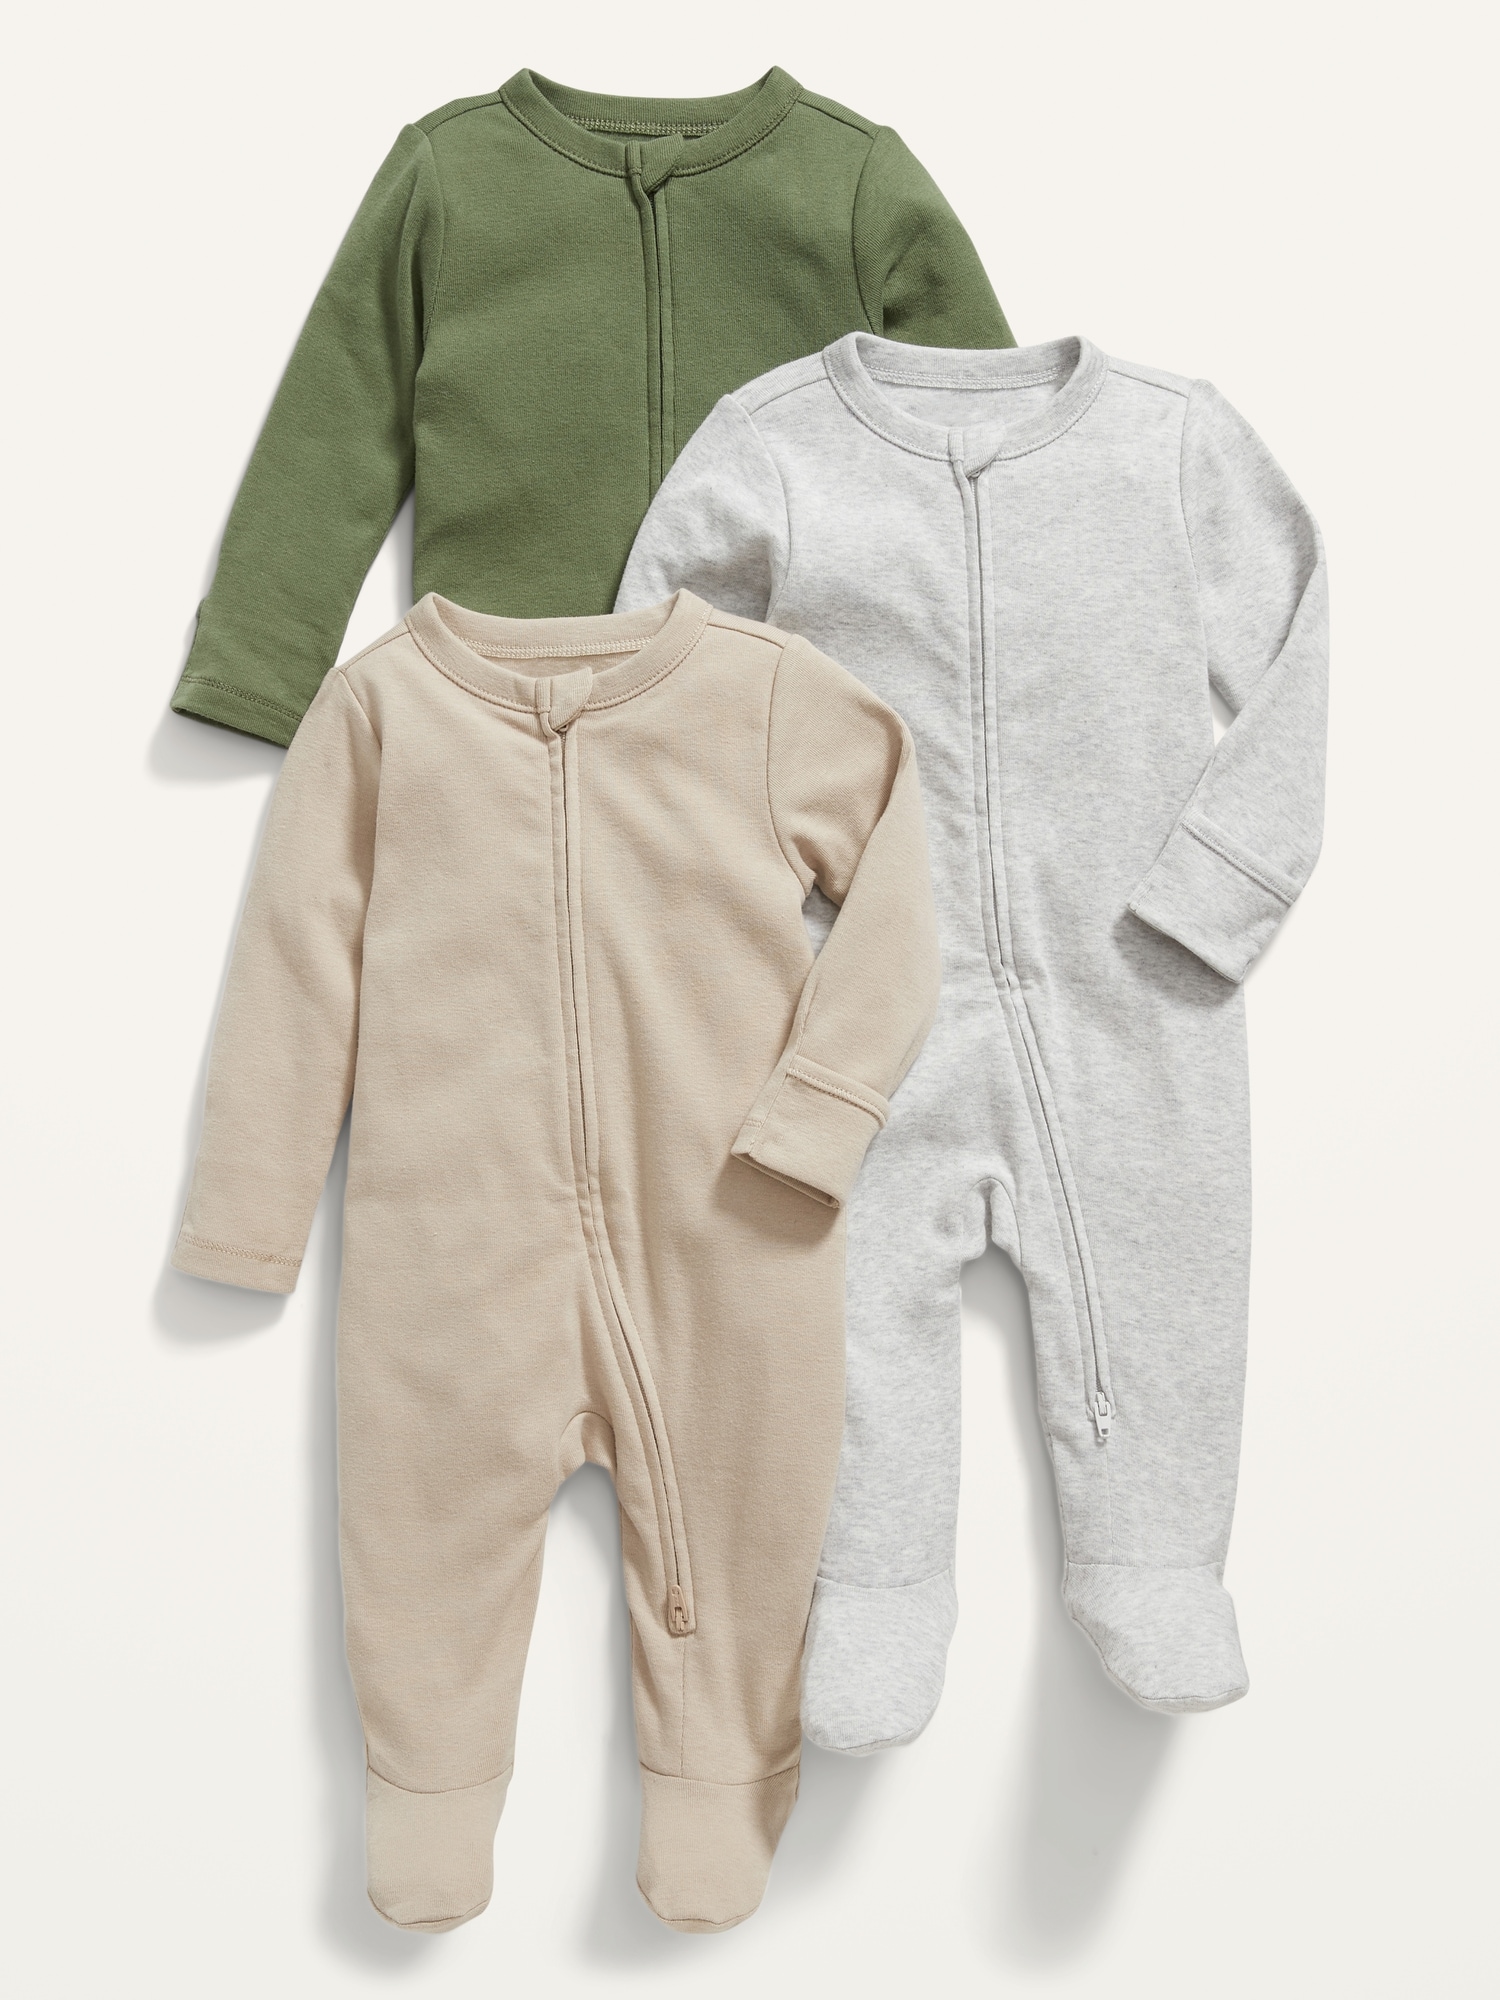 Old Navy Unisex 1-Way Zip Sleep & Play One-Piece 3-Pack for Baby red. 1